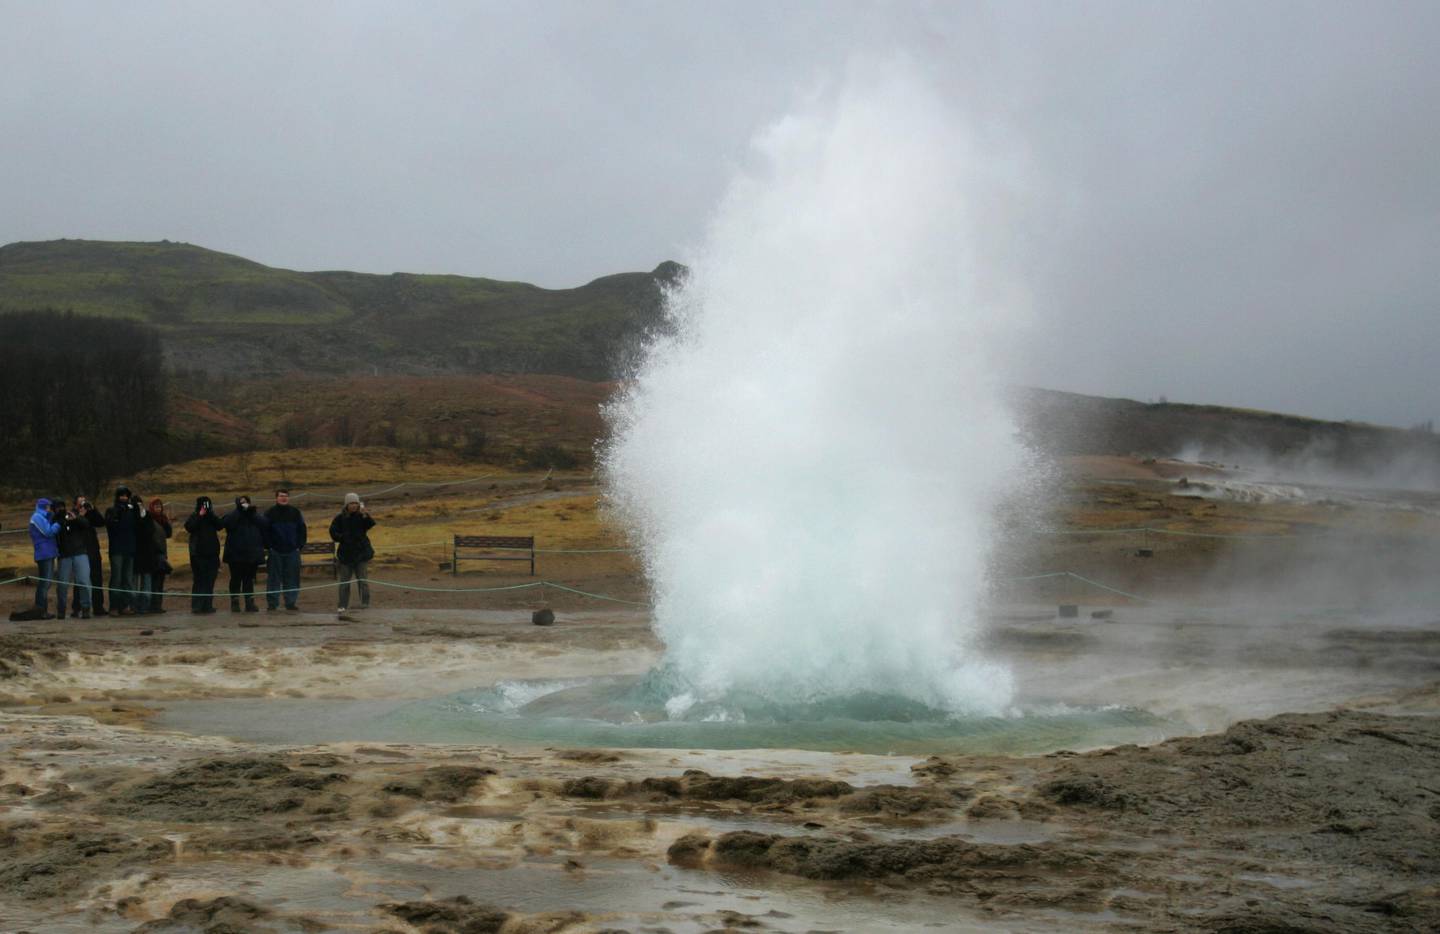 ** FOR IMMEDIATE RELEASE ** Tourists watch the Strokkur hot spring erupt, at the site of Geysir, Iceland, Feb. 22, 2006. Part of the 'Golden Circle' tour, the Geysir area, part of the natural phenomena in the country, it is one of the most popular tourist attractions.  (AP Photo/Kirsty Wigglesworth) 